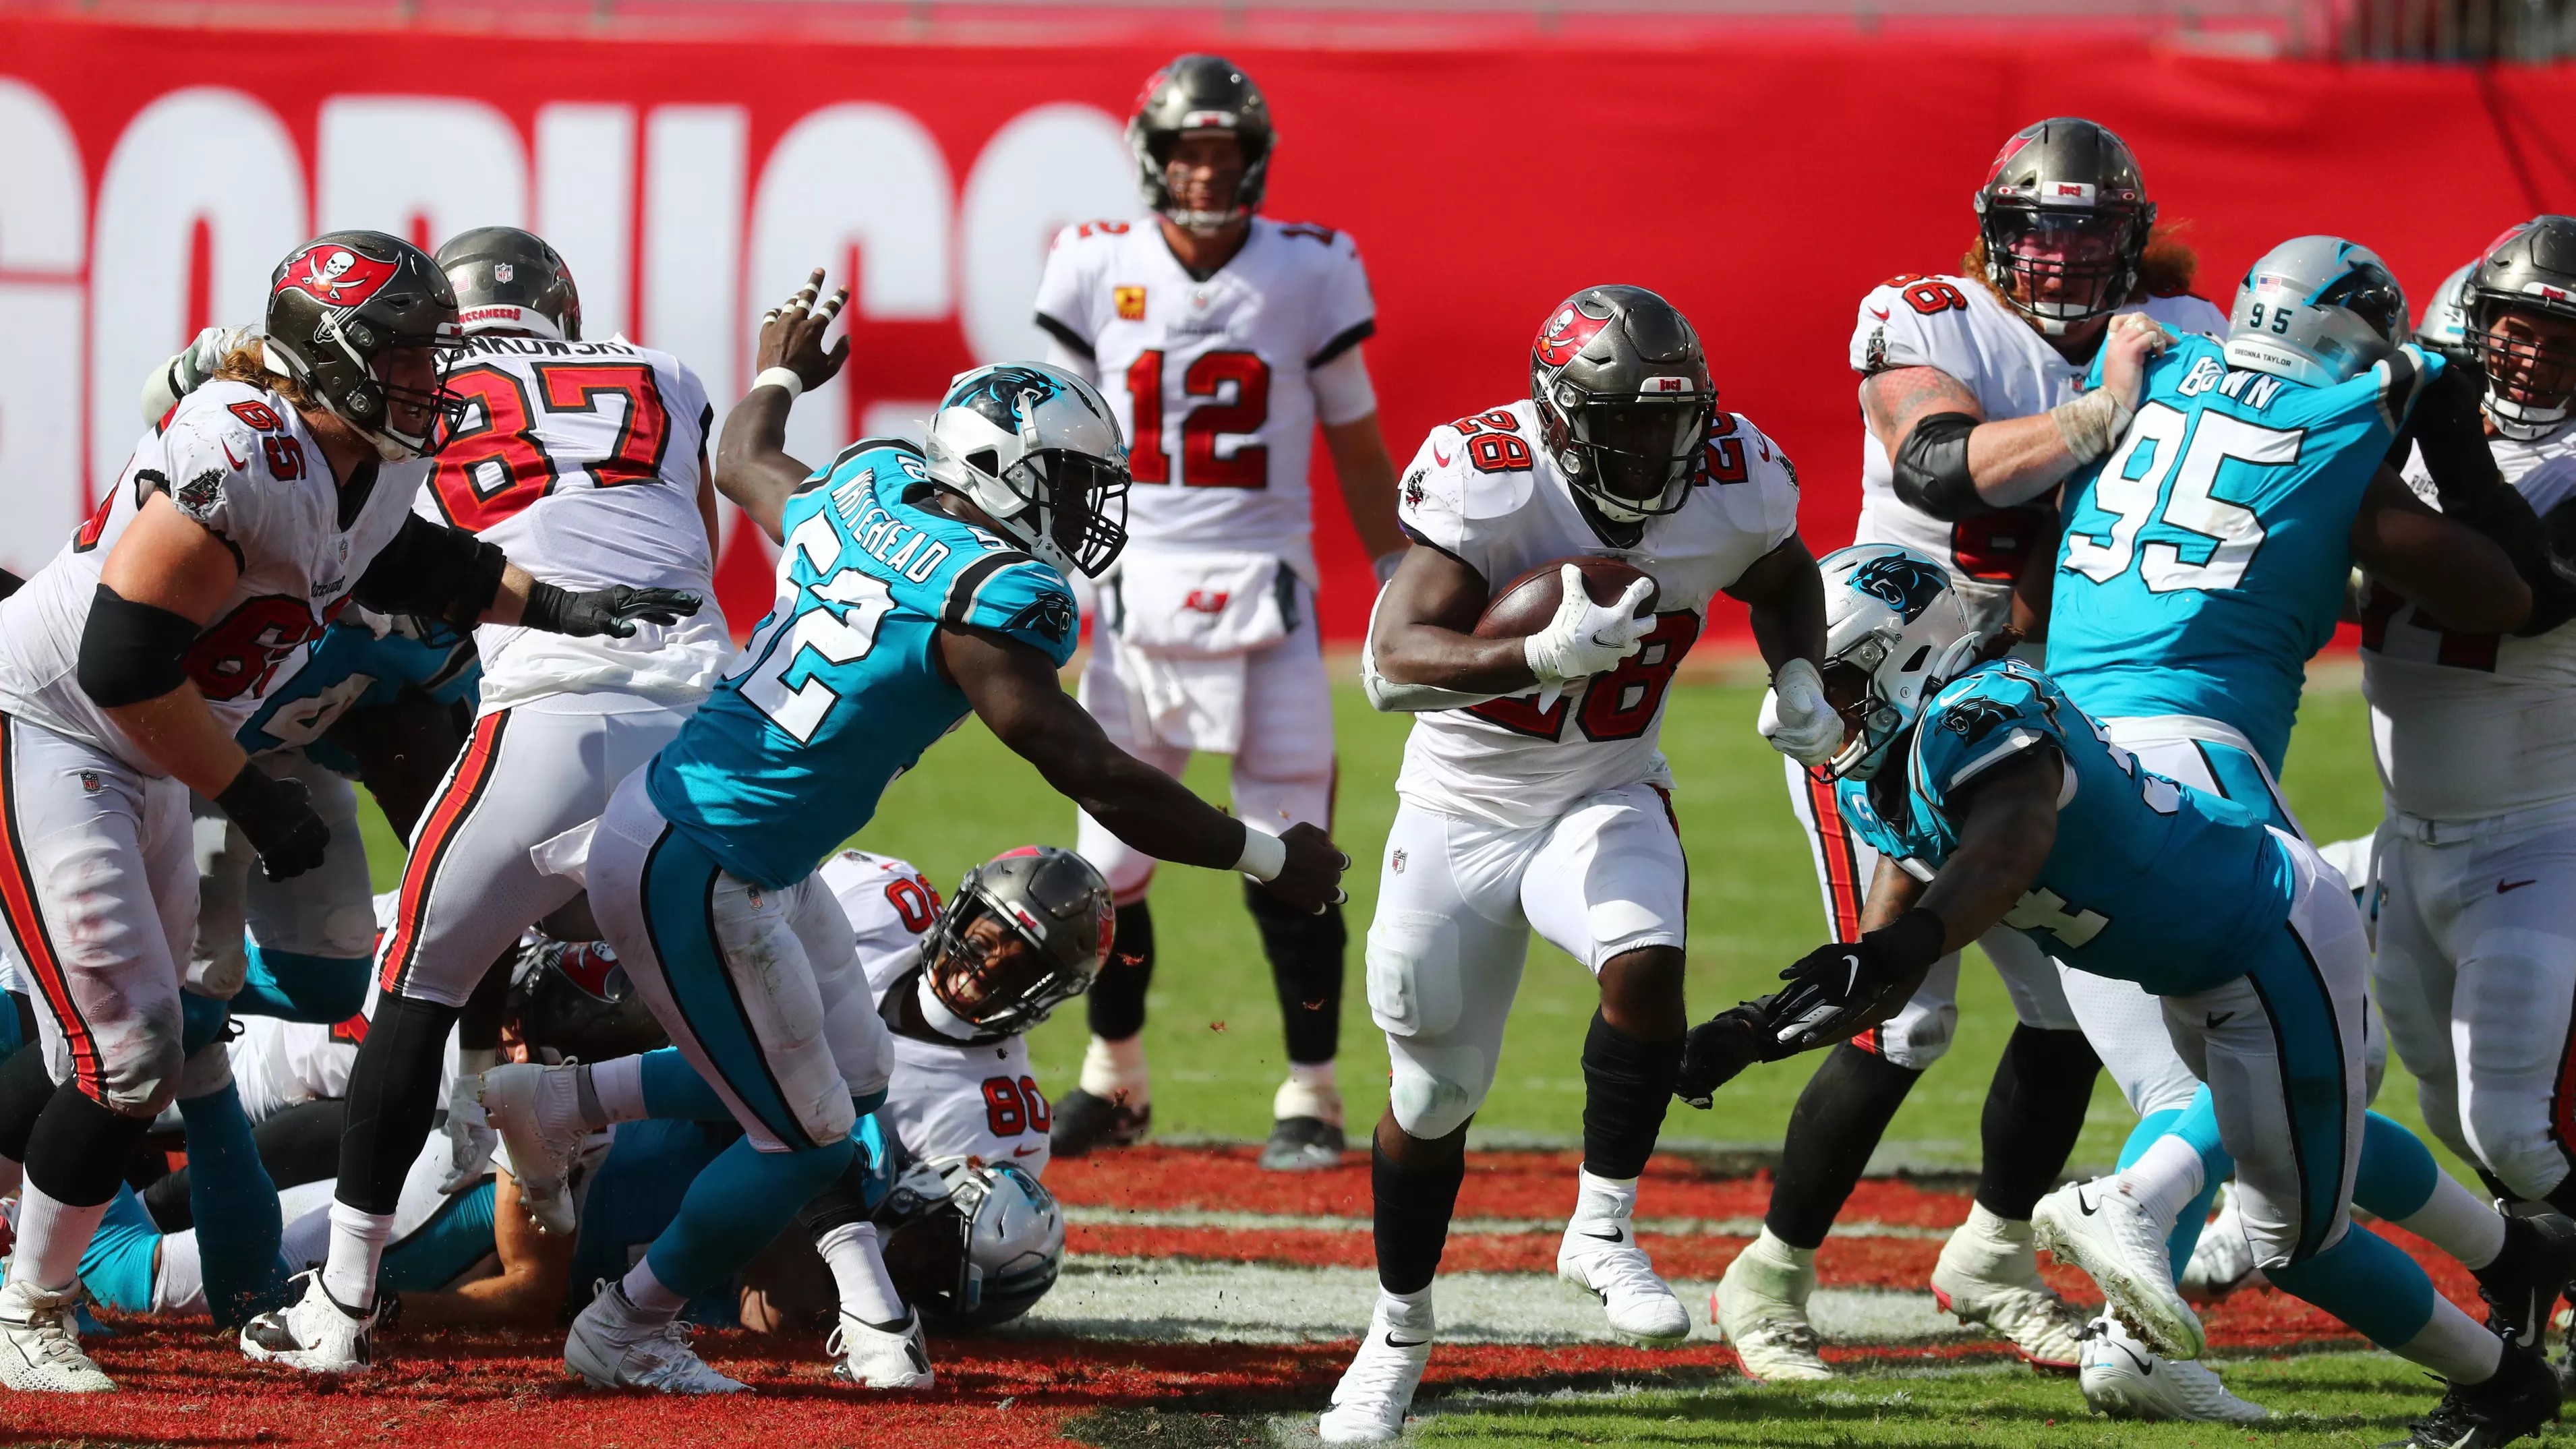 Buccaneers vs. Panthers recap A tale of two halves in 3117 win